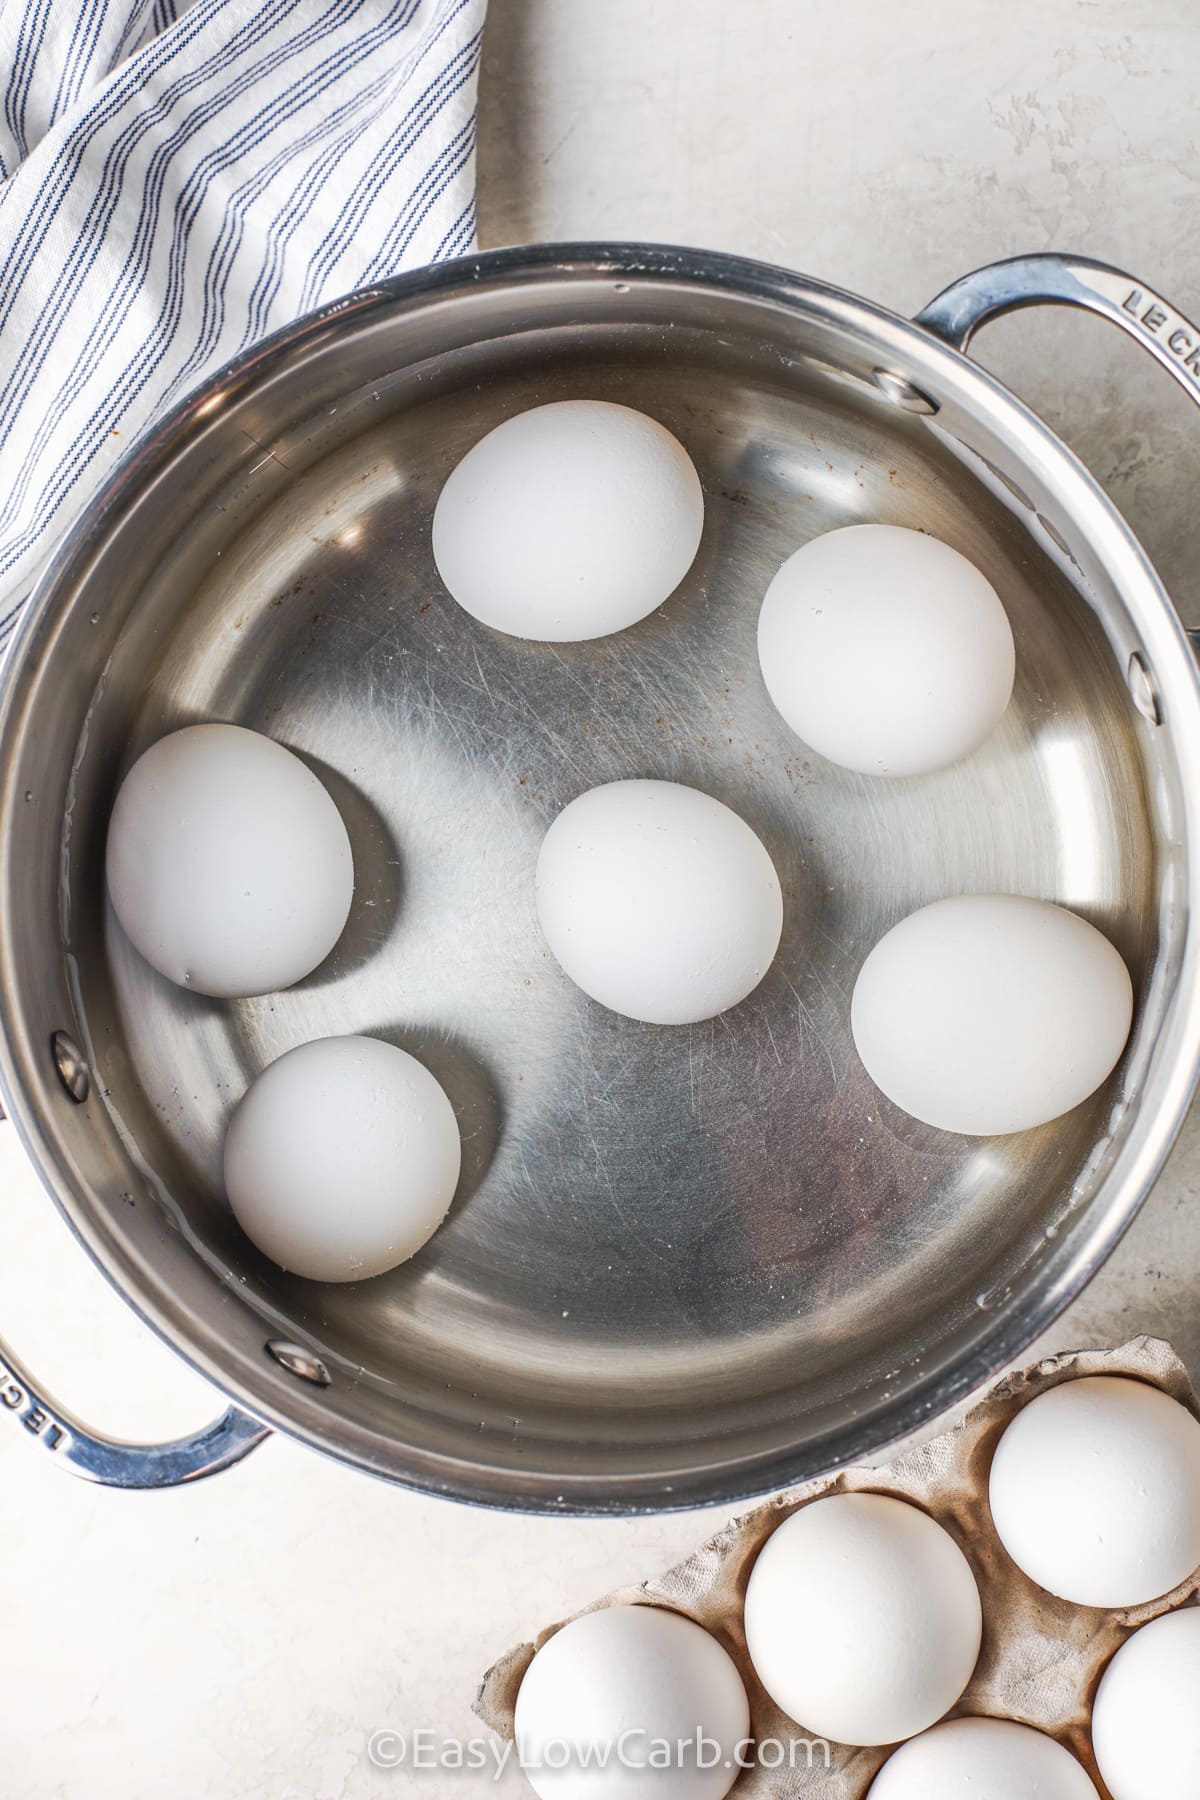 eggs in a pot with water to make Easy Hard Boiled Eggs